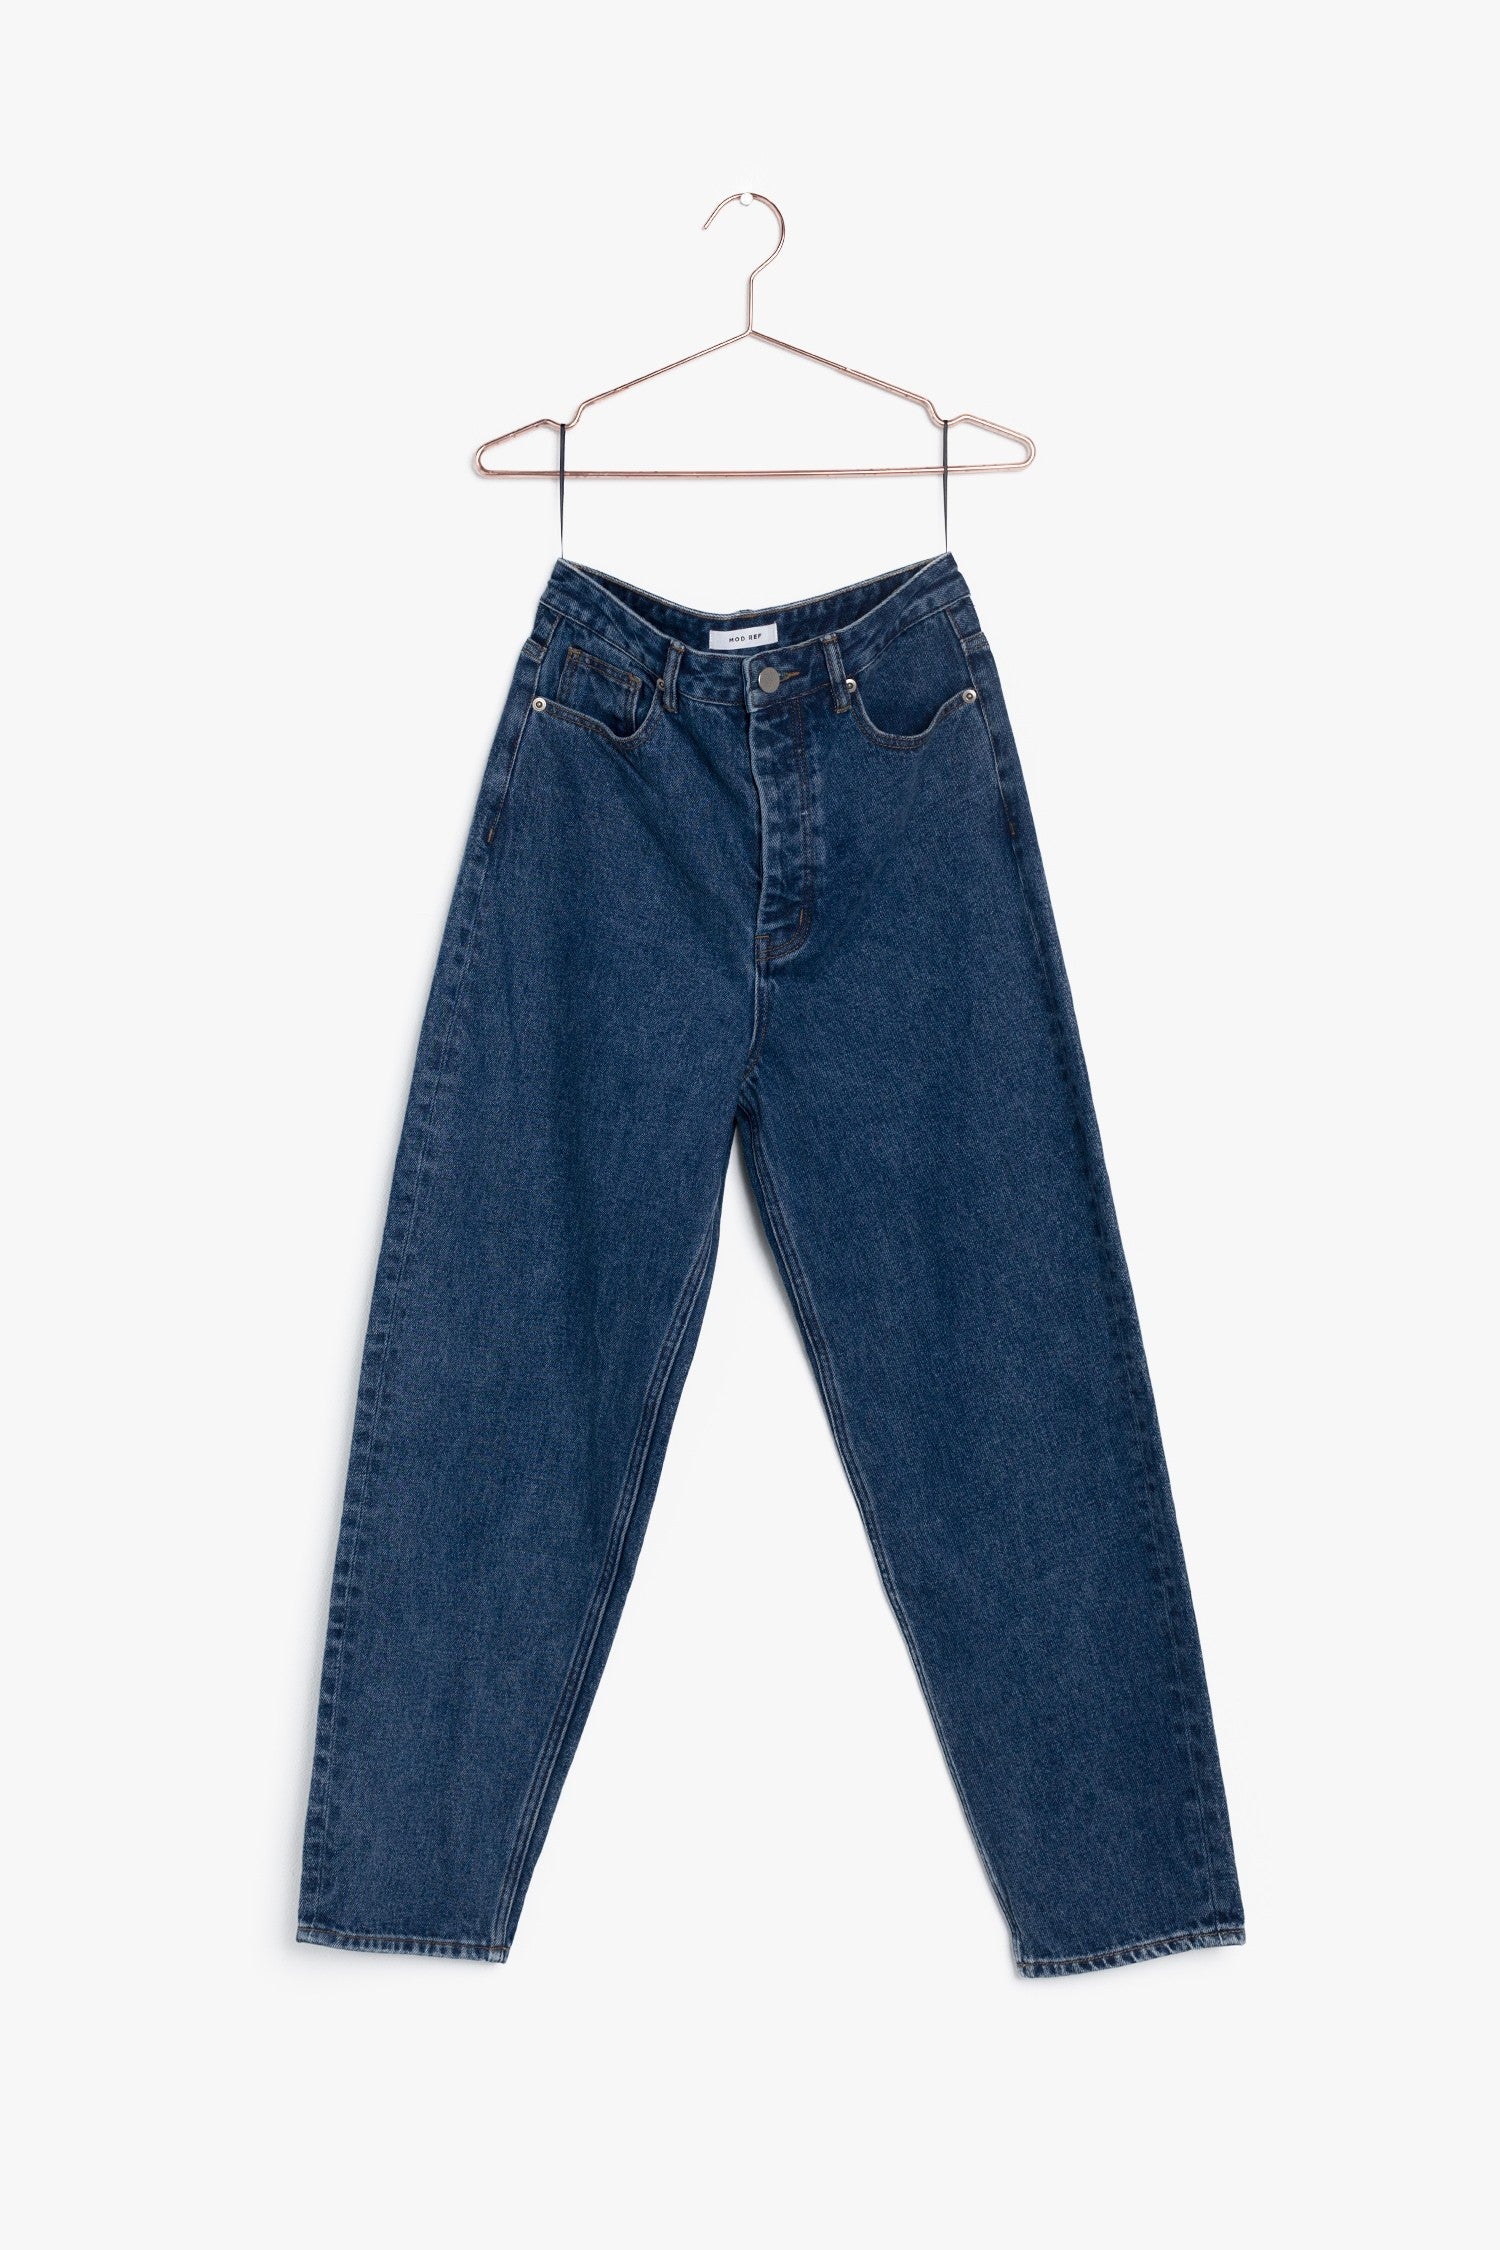 Mod Ref - The Marra Jeans | Blue